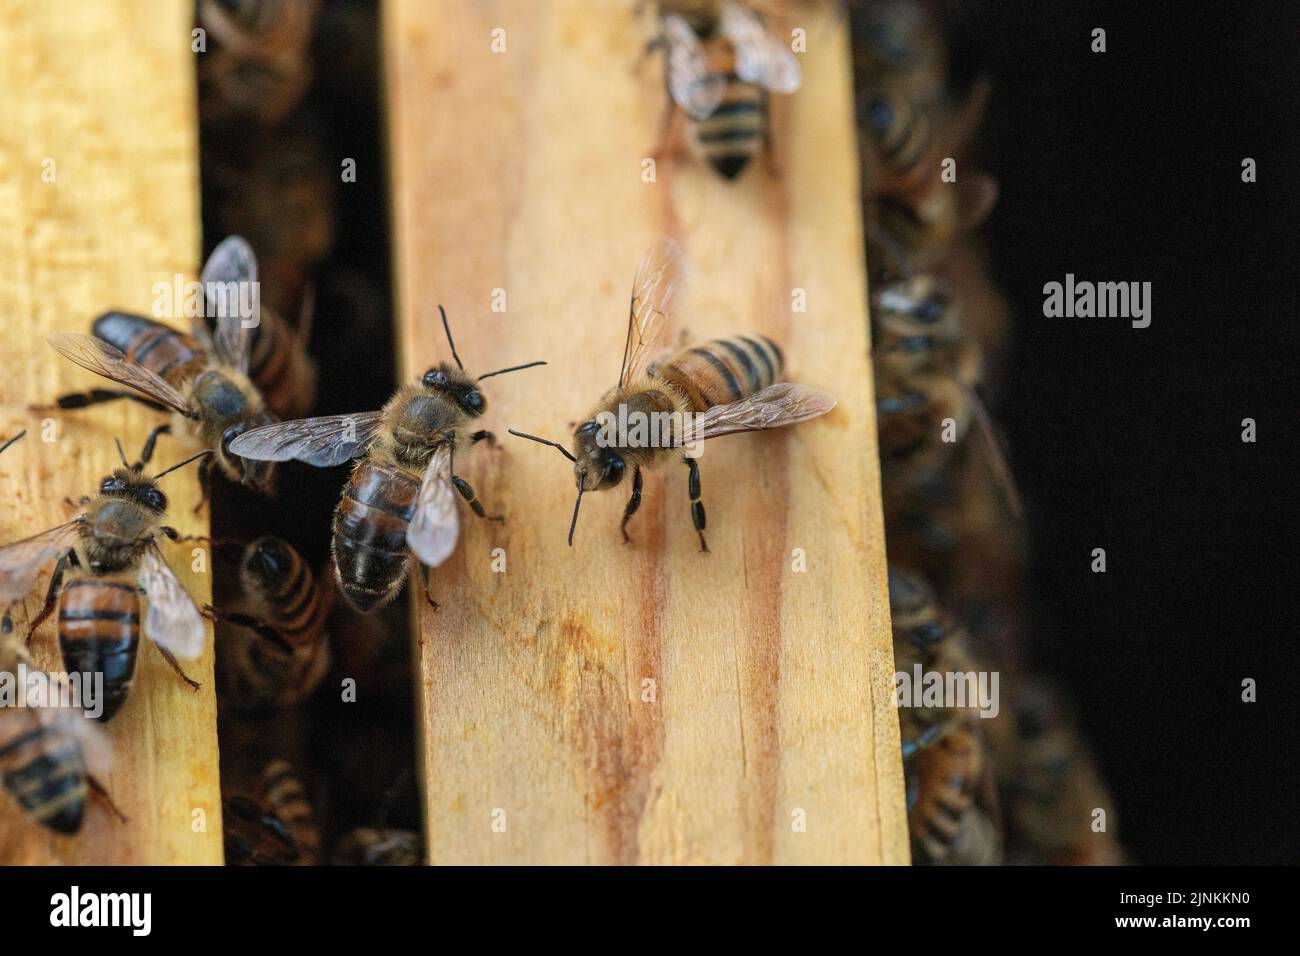 Macro close up of a bee on the wooden part of the beehive among the bee colony. Stock Photo